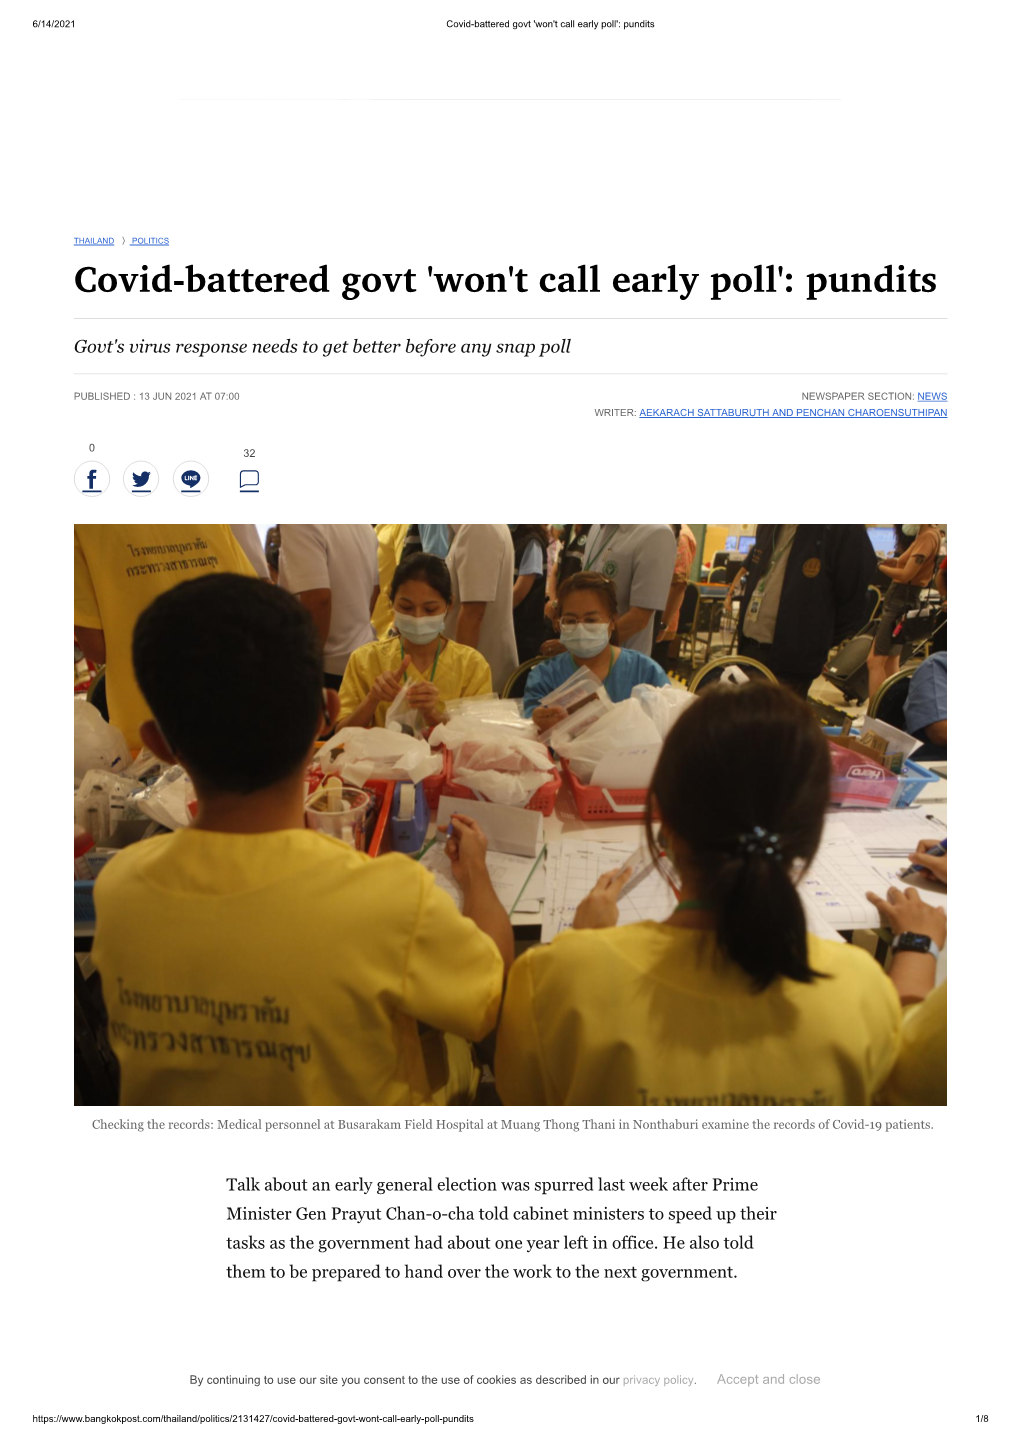 Covid-Battered Govt 'Won't Call Early Poll': Pundits